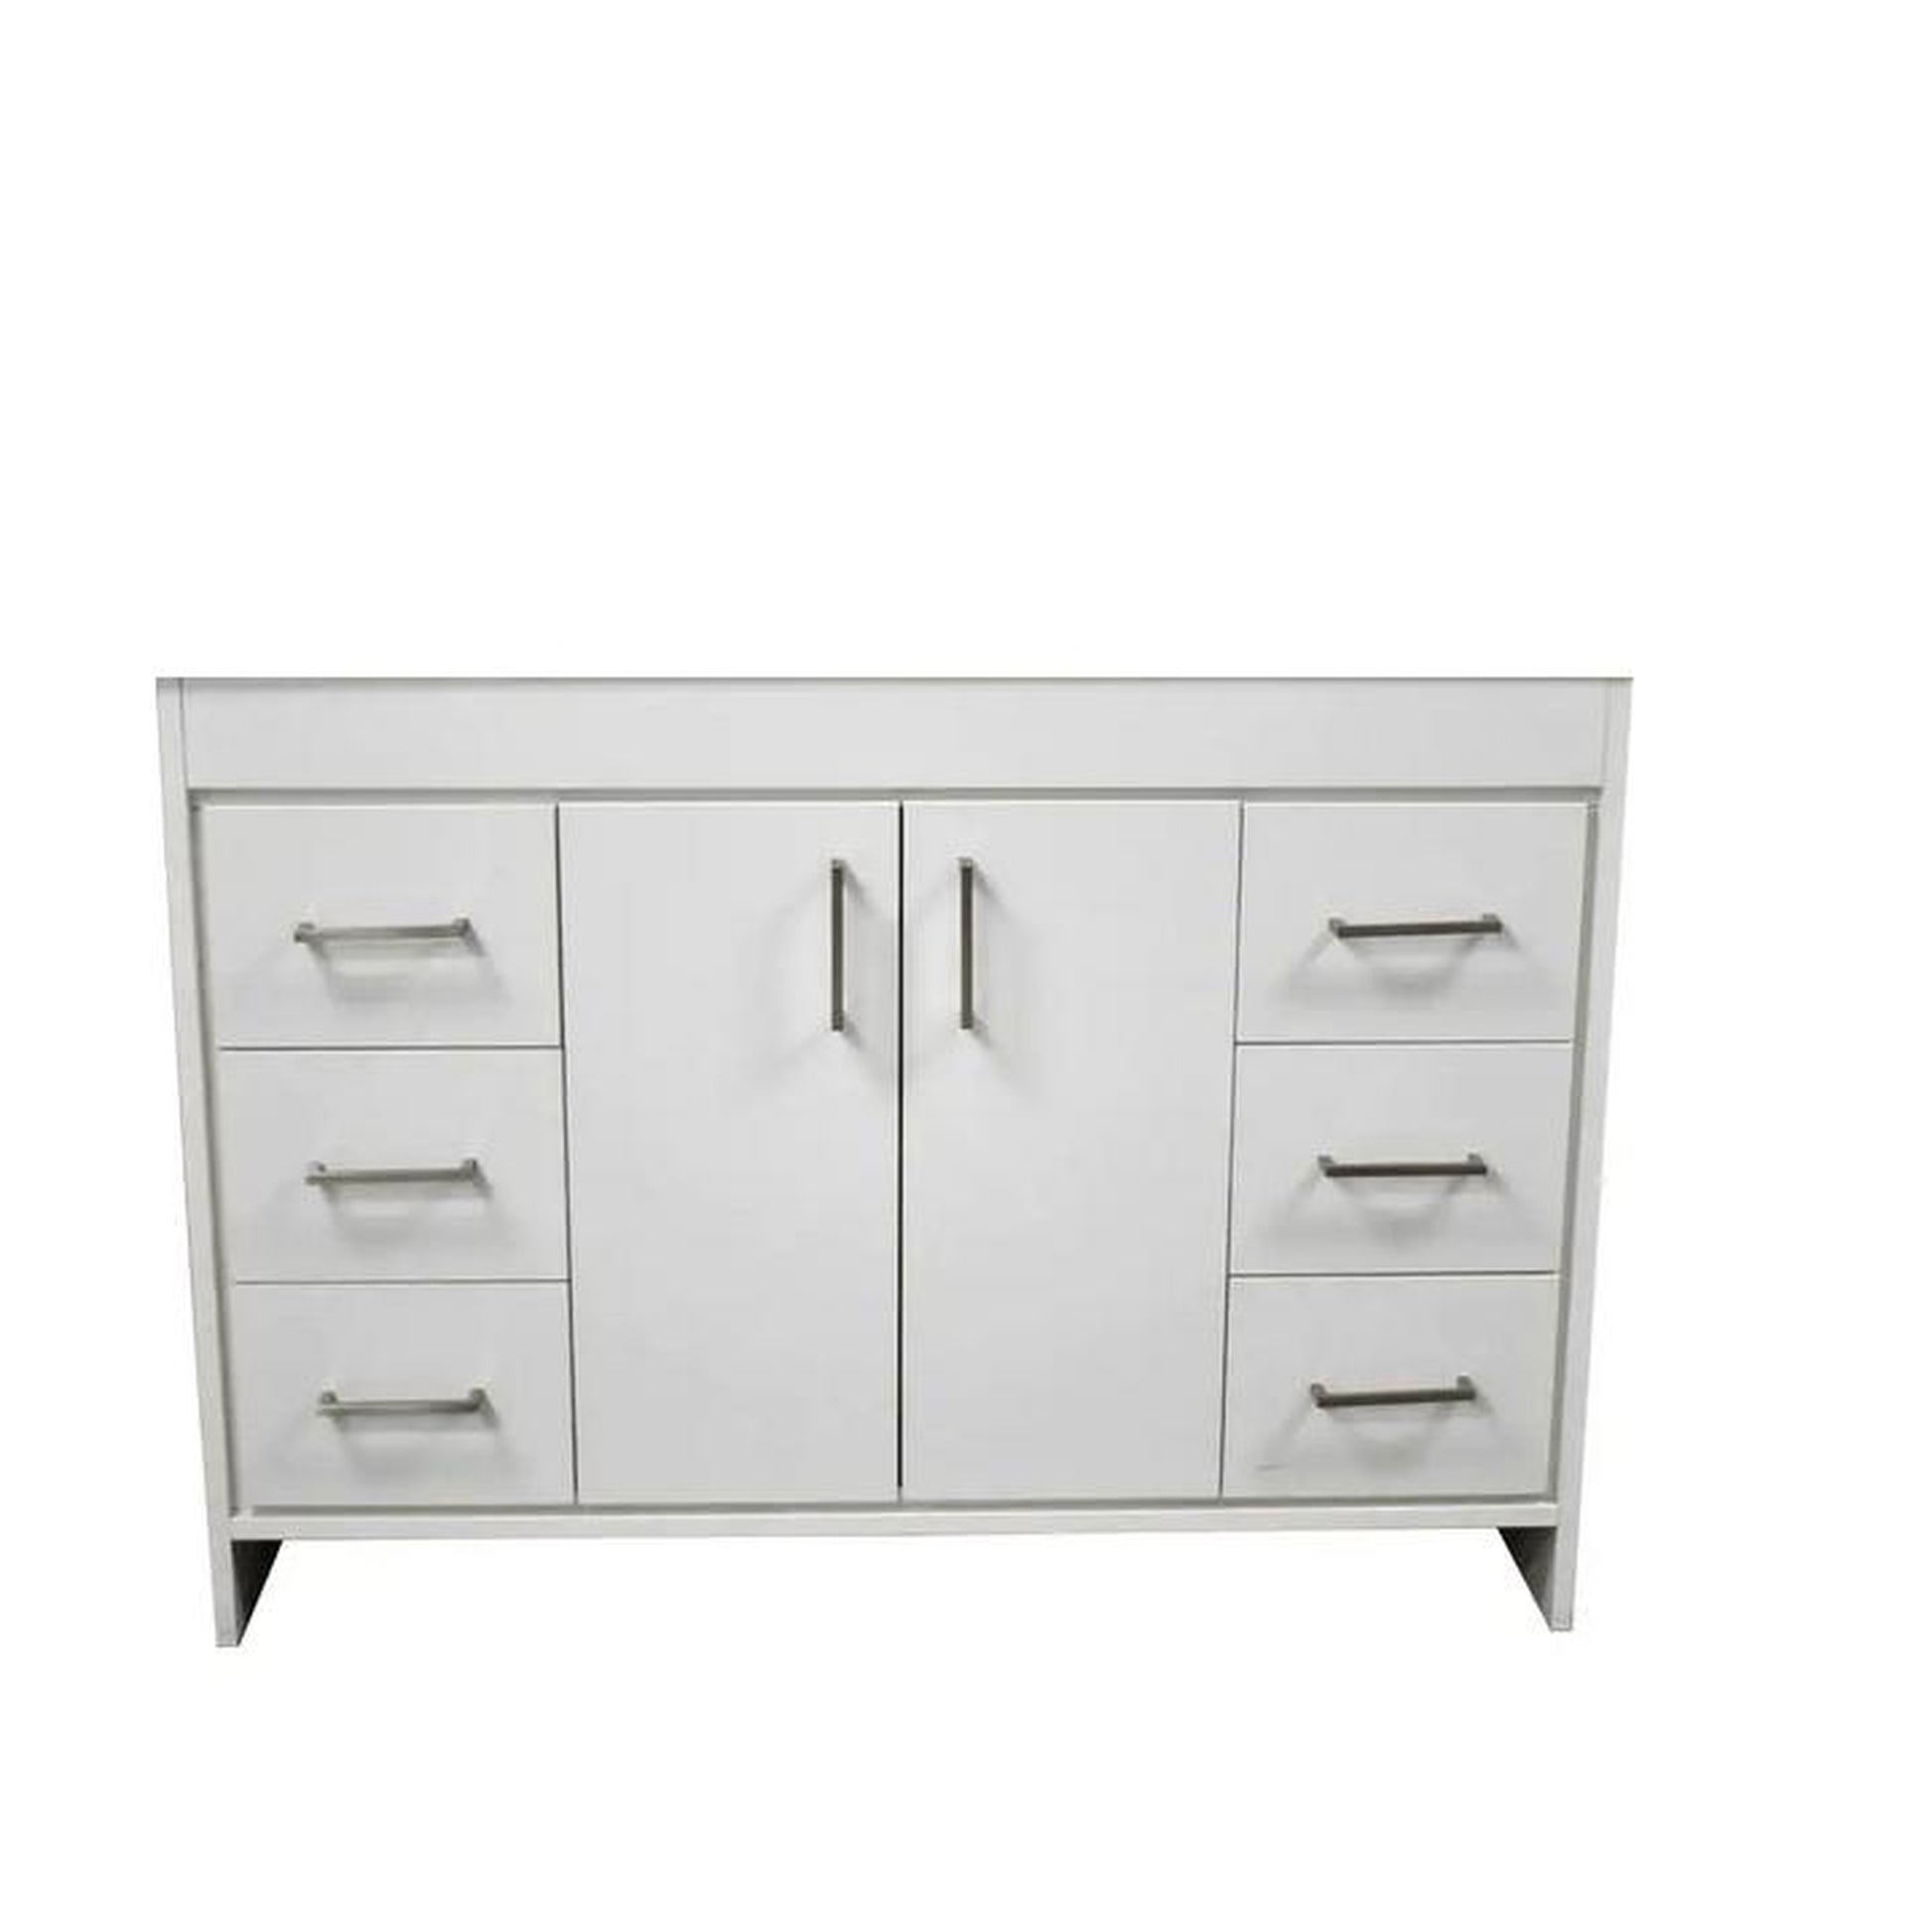 Volpa USA Rio 60" White Freestanding Modern Bathroom Vanity For Single Sink With Brushed Nickel Handles